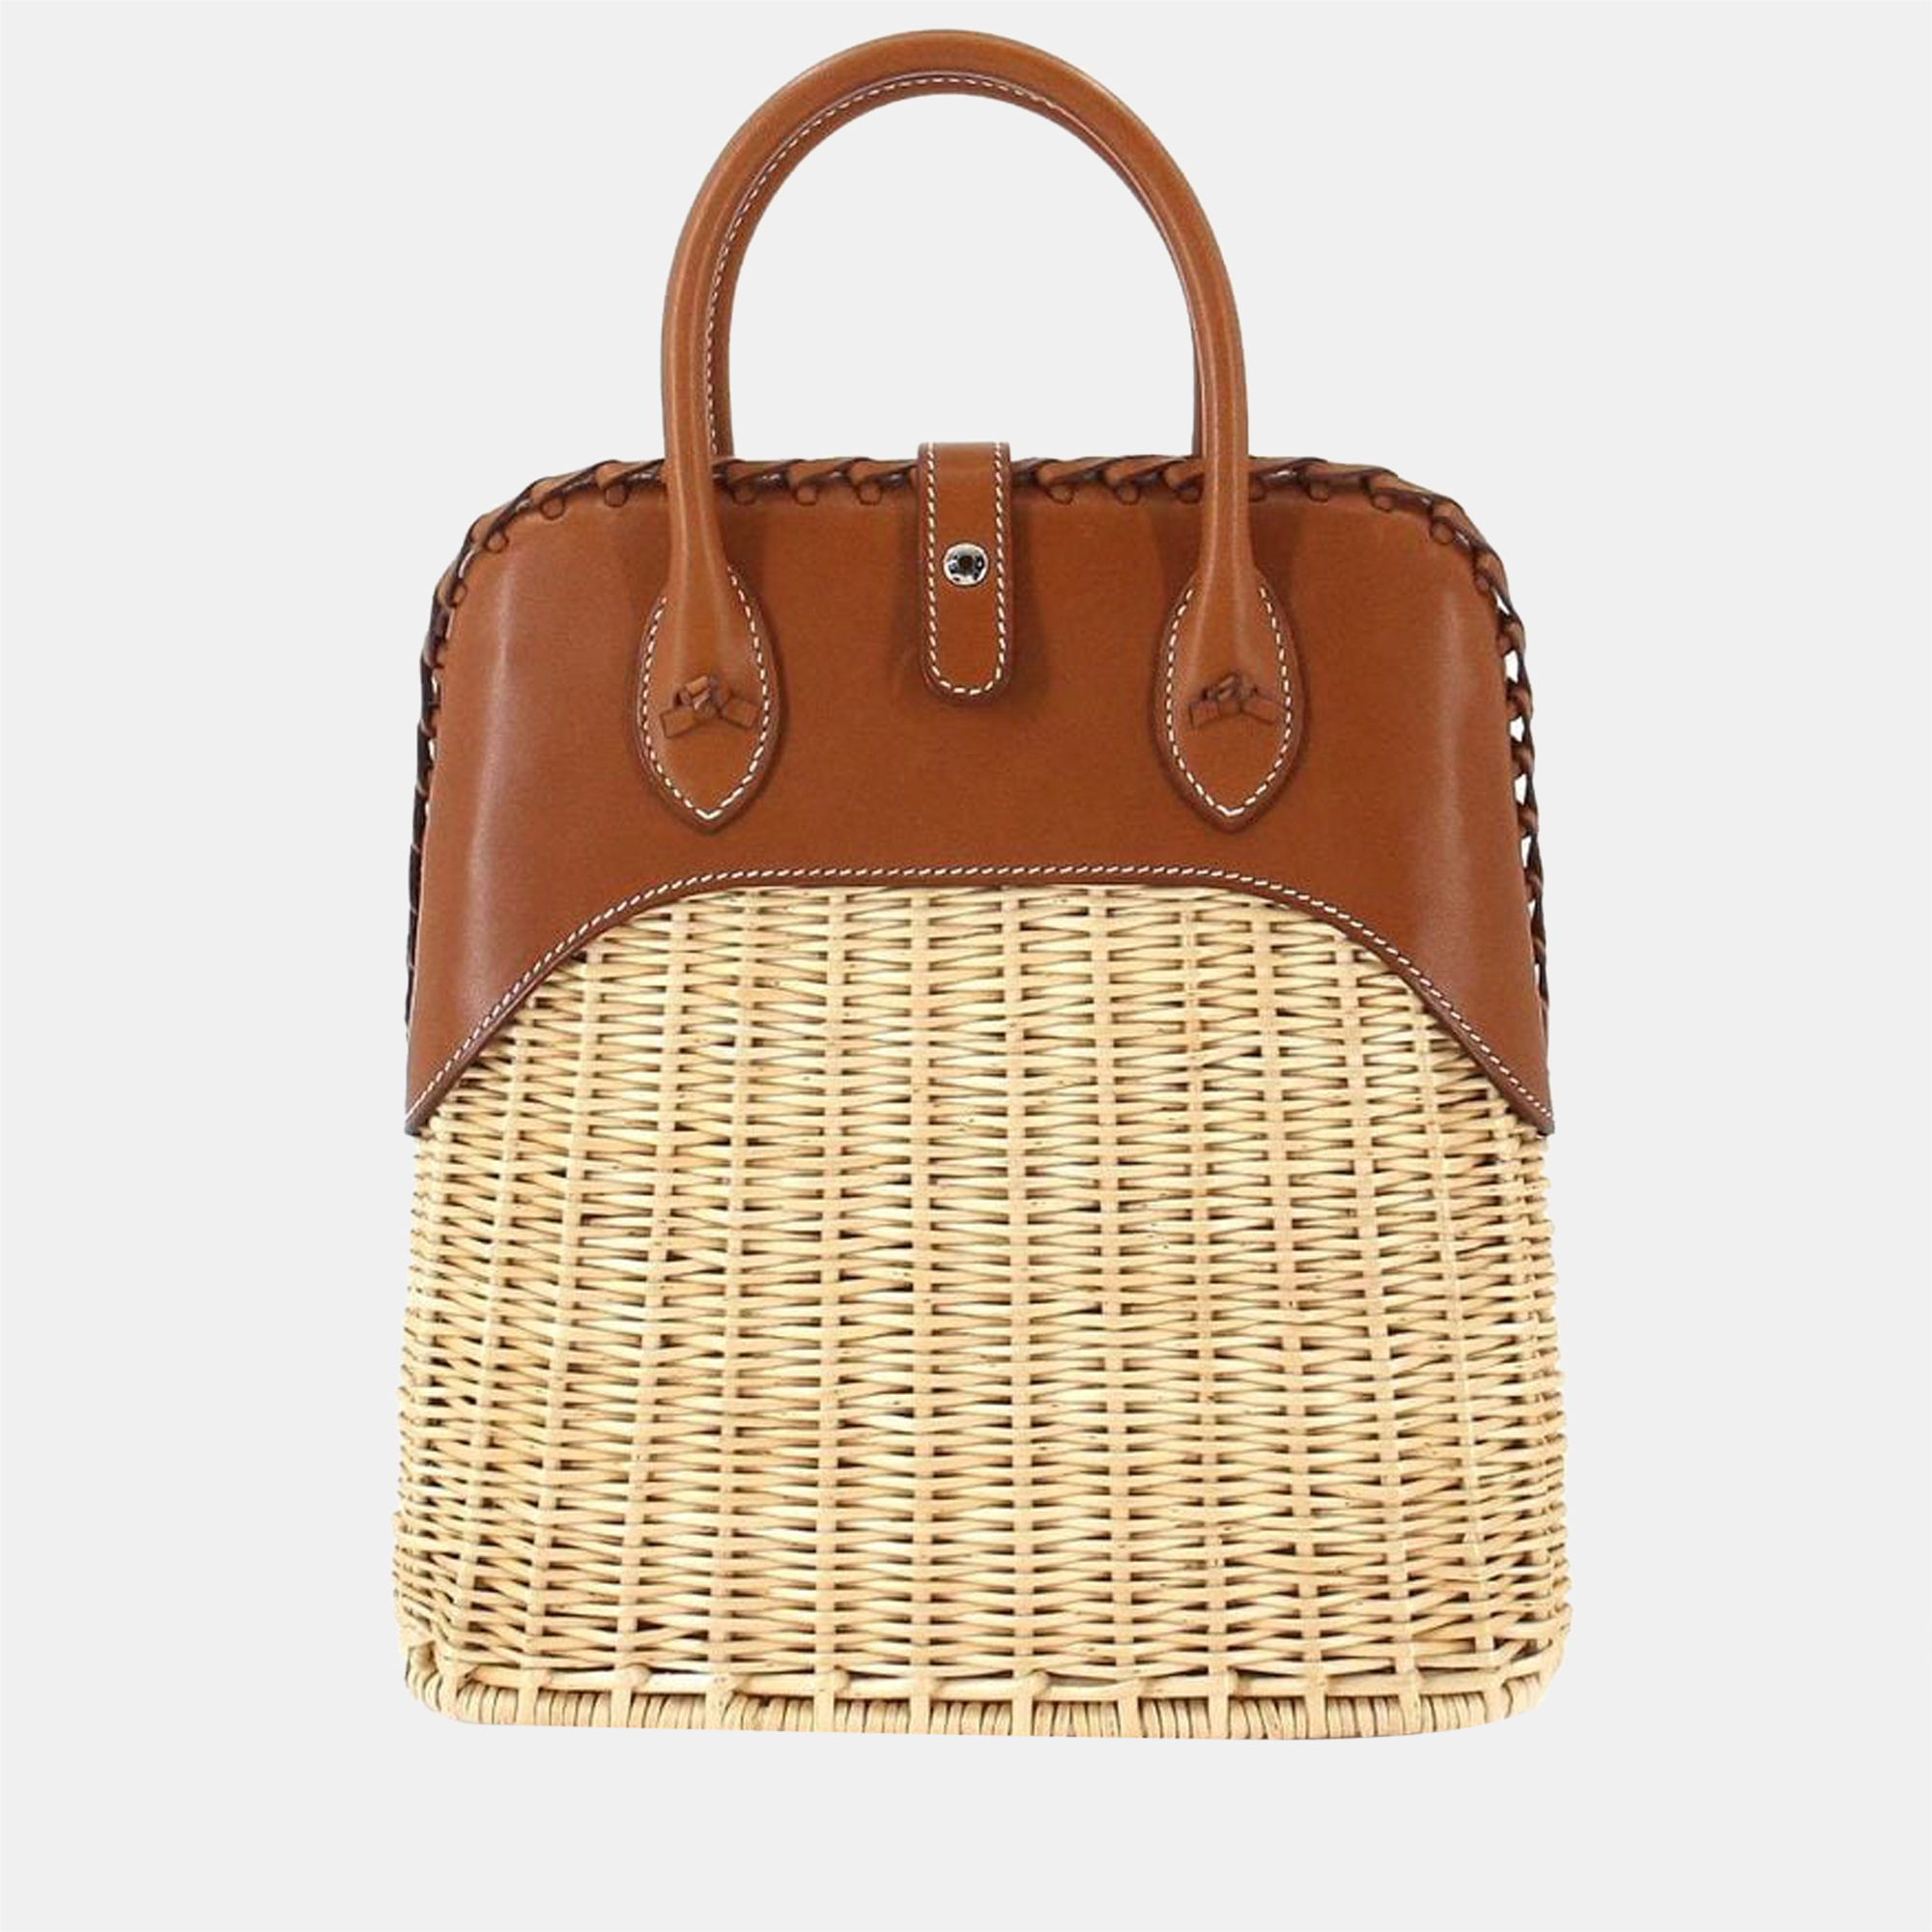 Hermes bolide picnic hand bag barenia willow forbe natural a engraved silver hardware